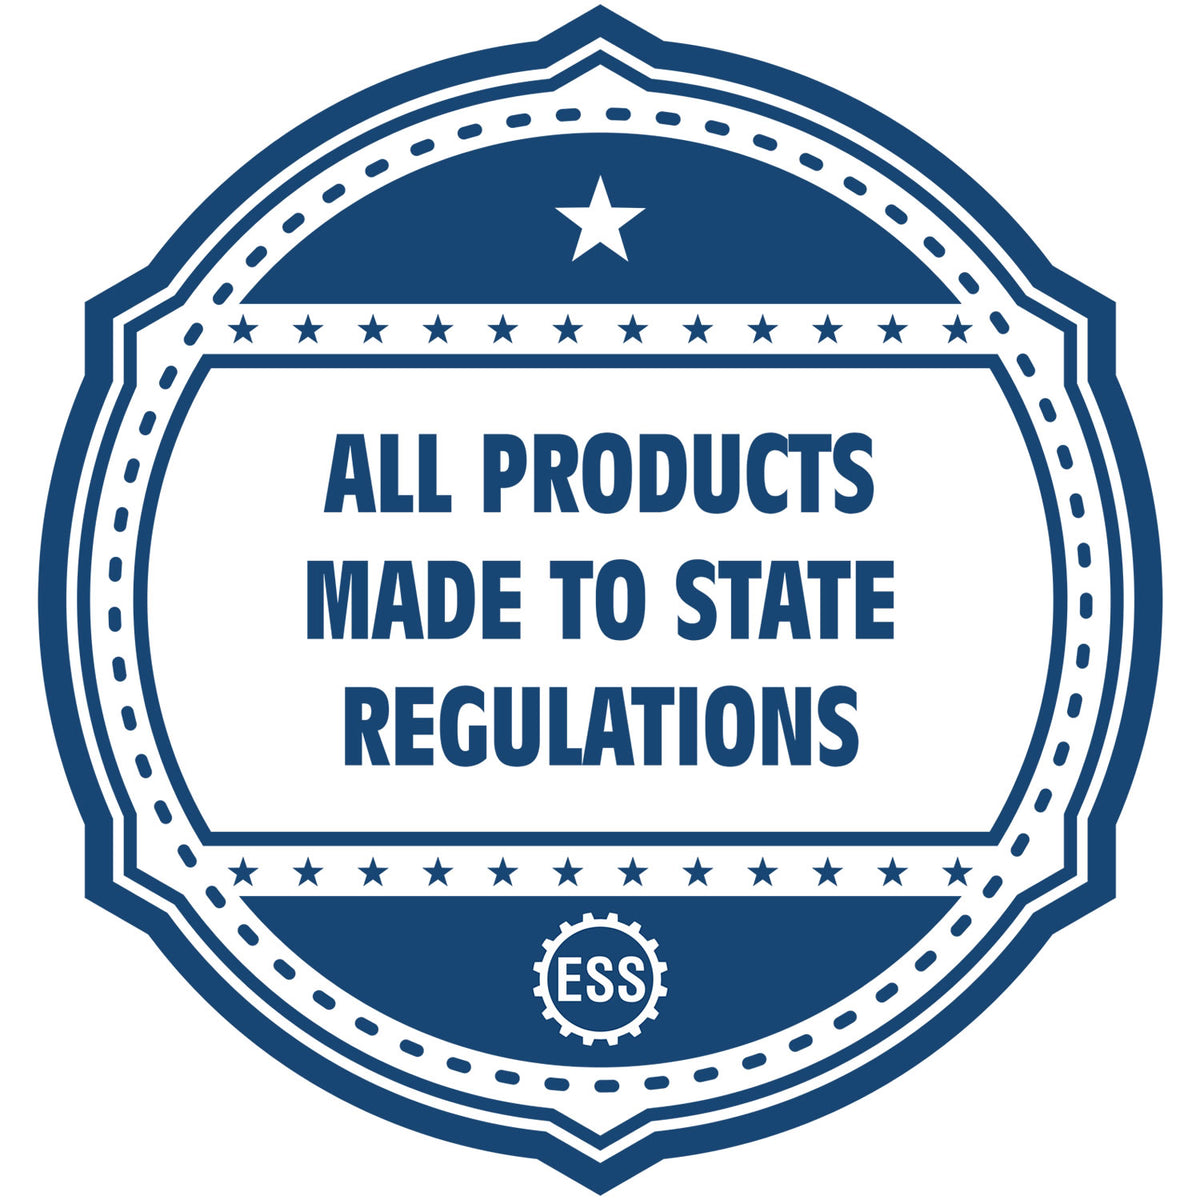 An icon or badge element for the Slim Pre-Inked State Seal Notary Stamp for Montana showing that this product is made in compliance with state regulations.